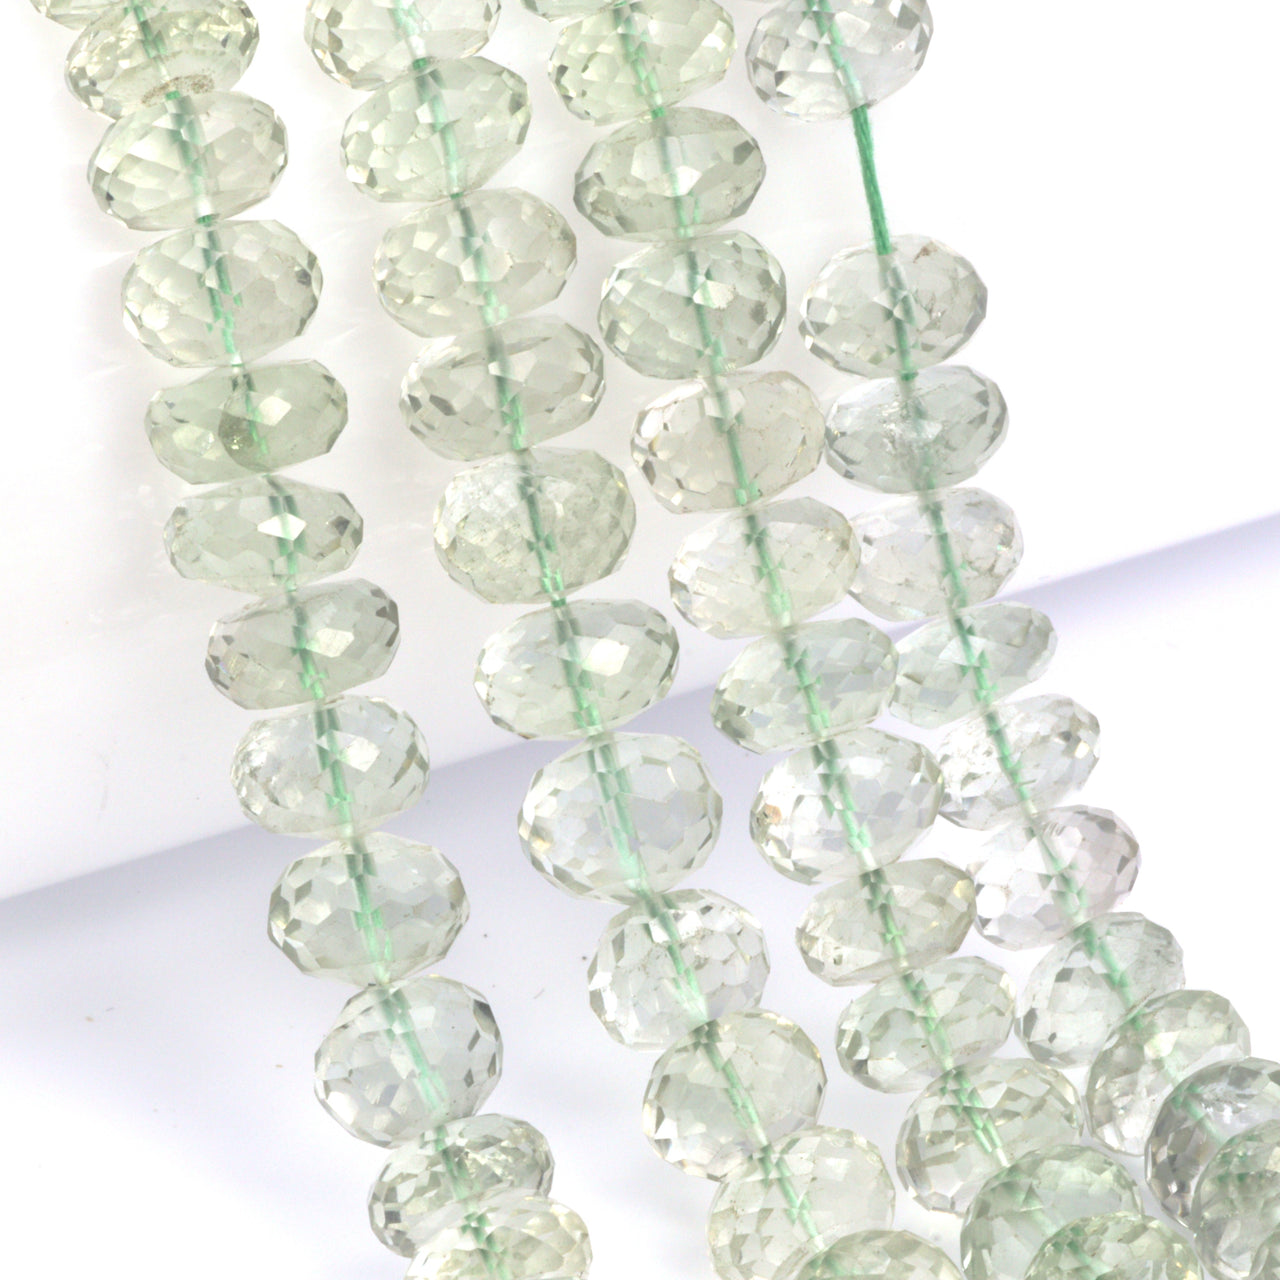 Green Amethyst 8mm Faceted Rondelles